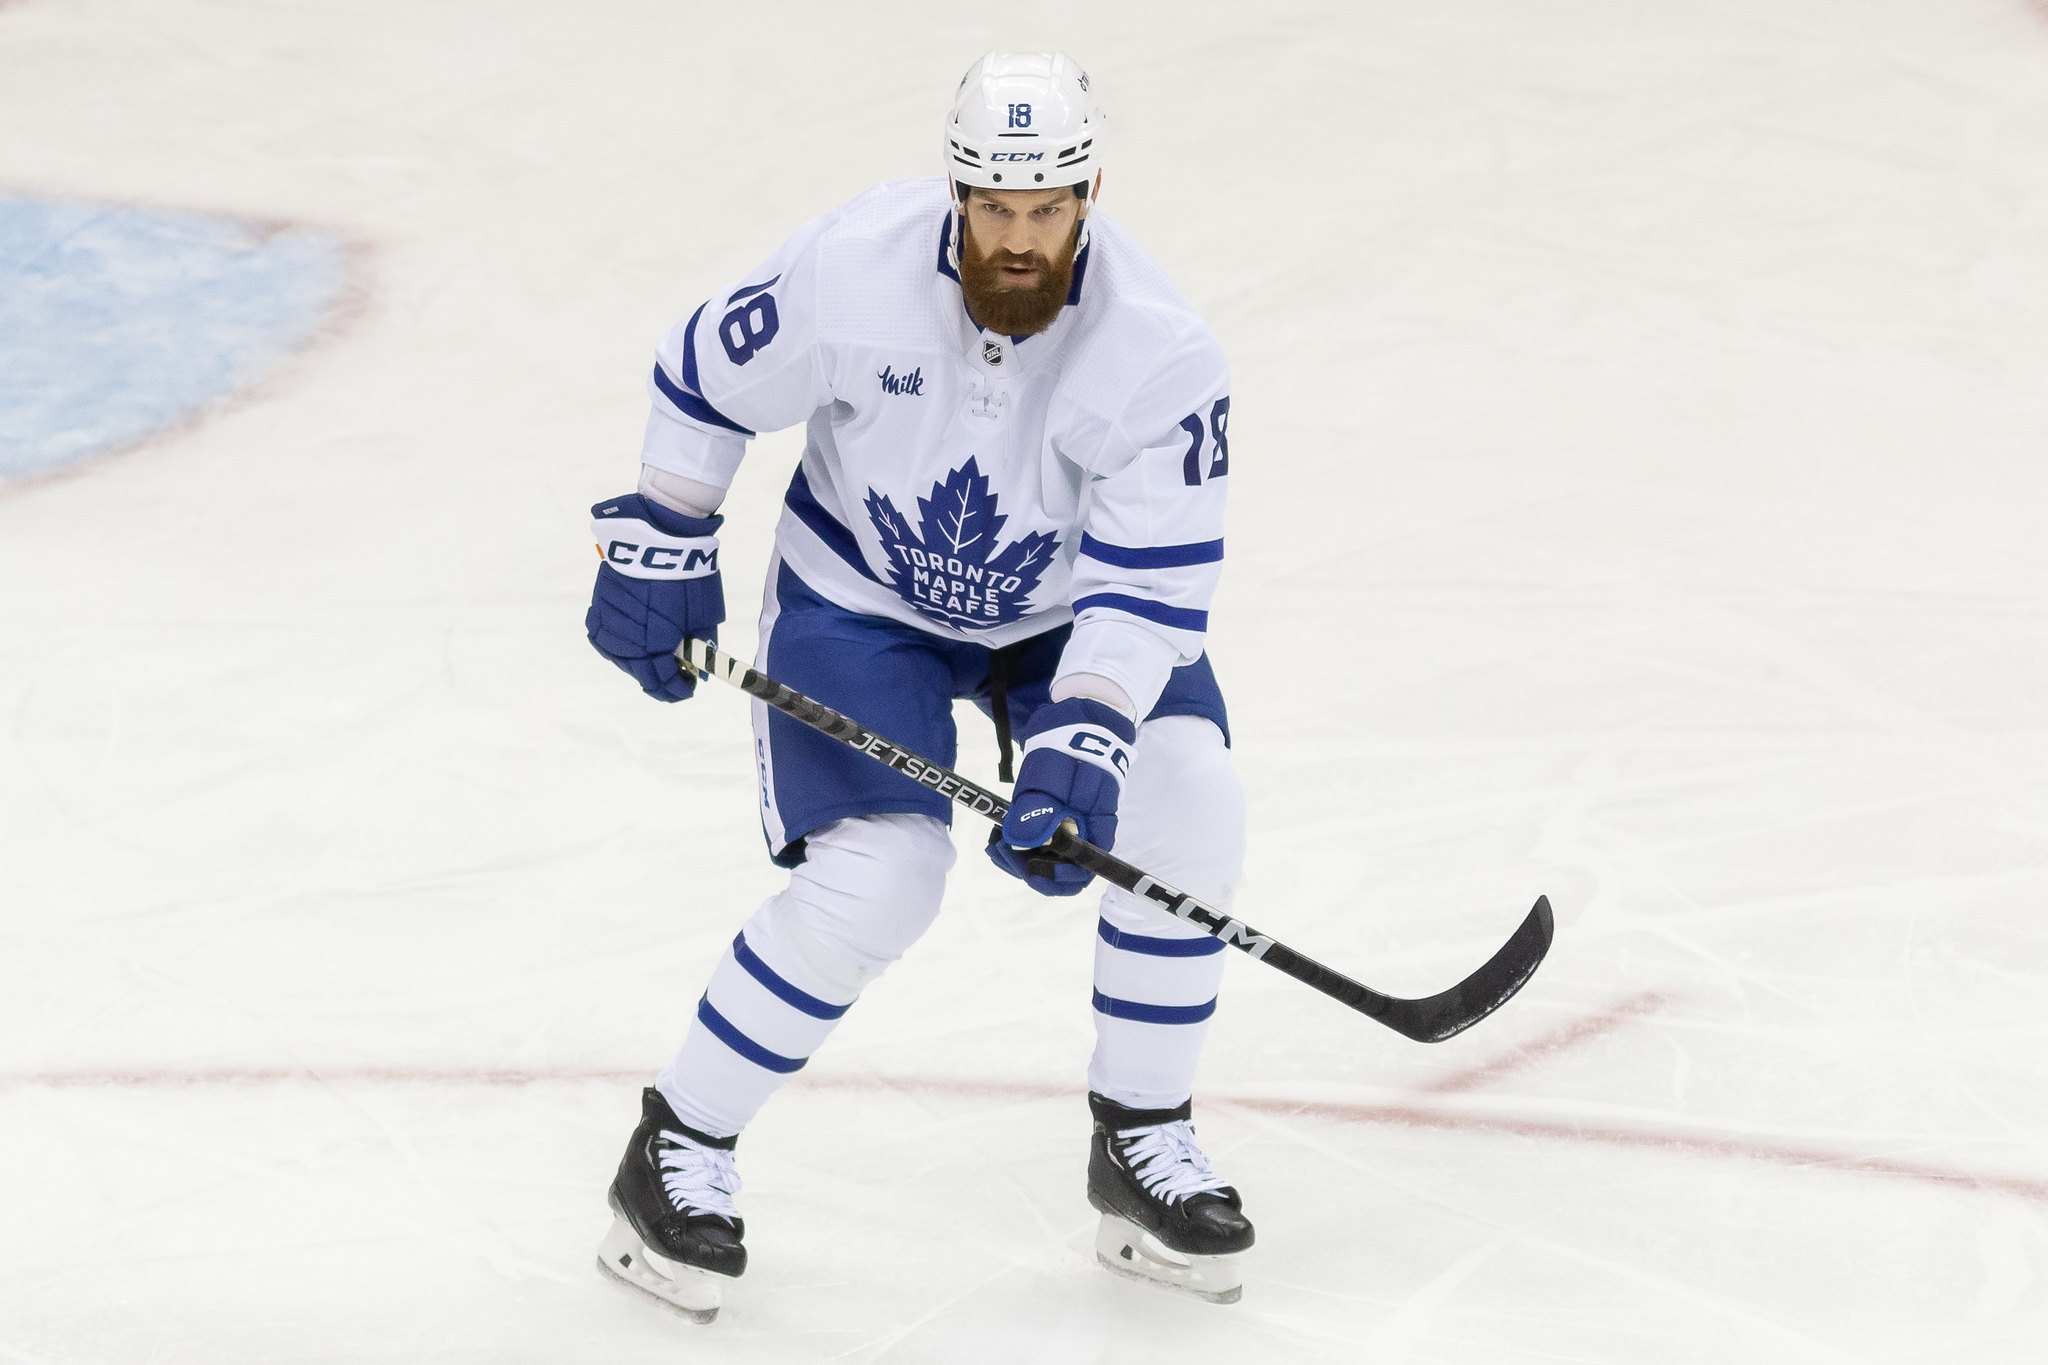 Ranking the 2022-23 Maple Leafs' Roster Players